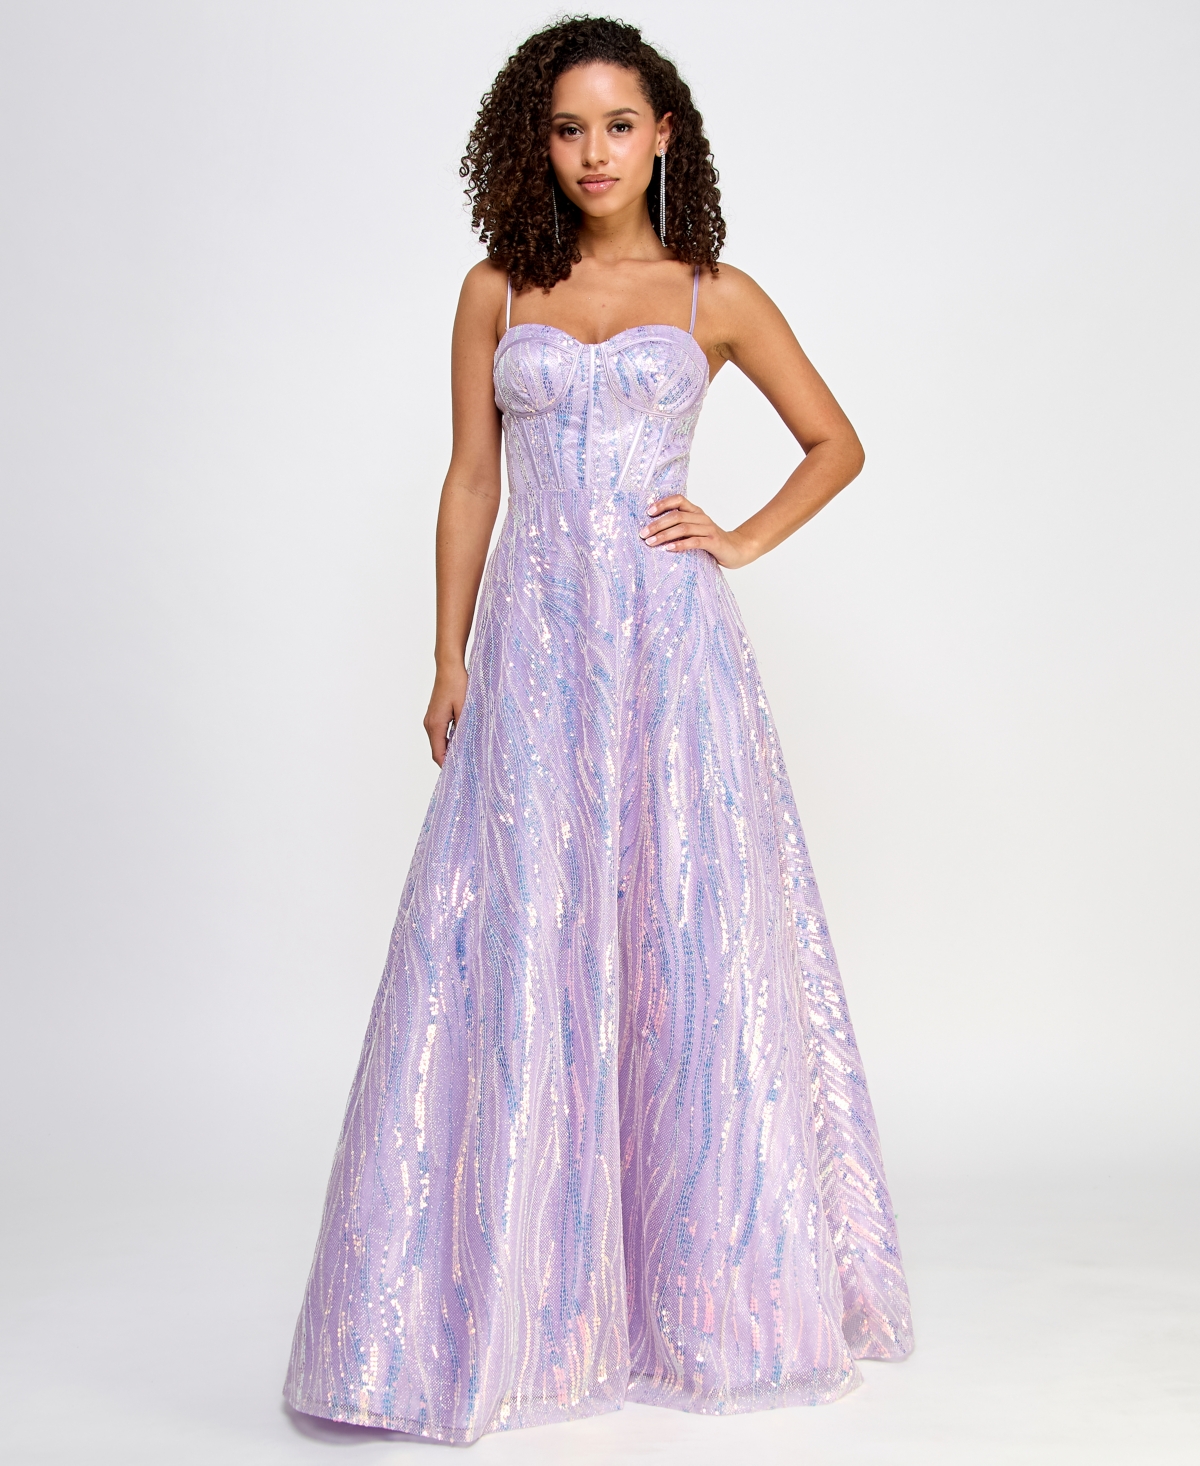 Juniors' Sequin Embellished Sleeveless Gown, Created for Macy's - Lilac/Iridescent